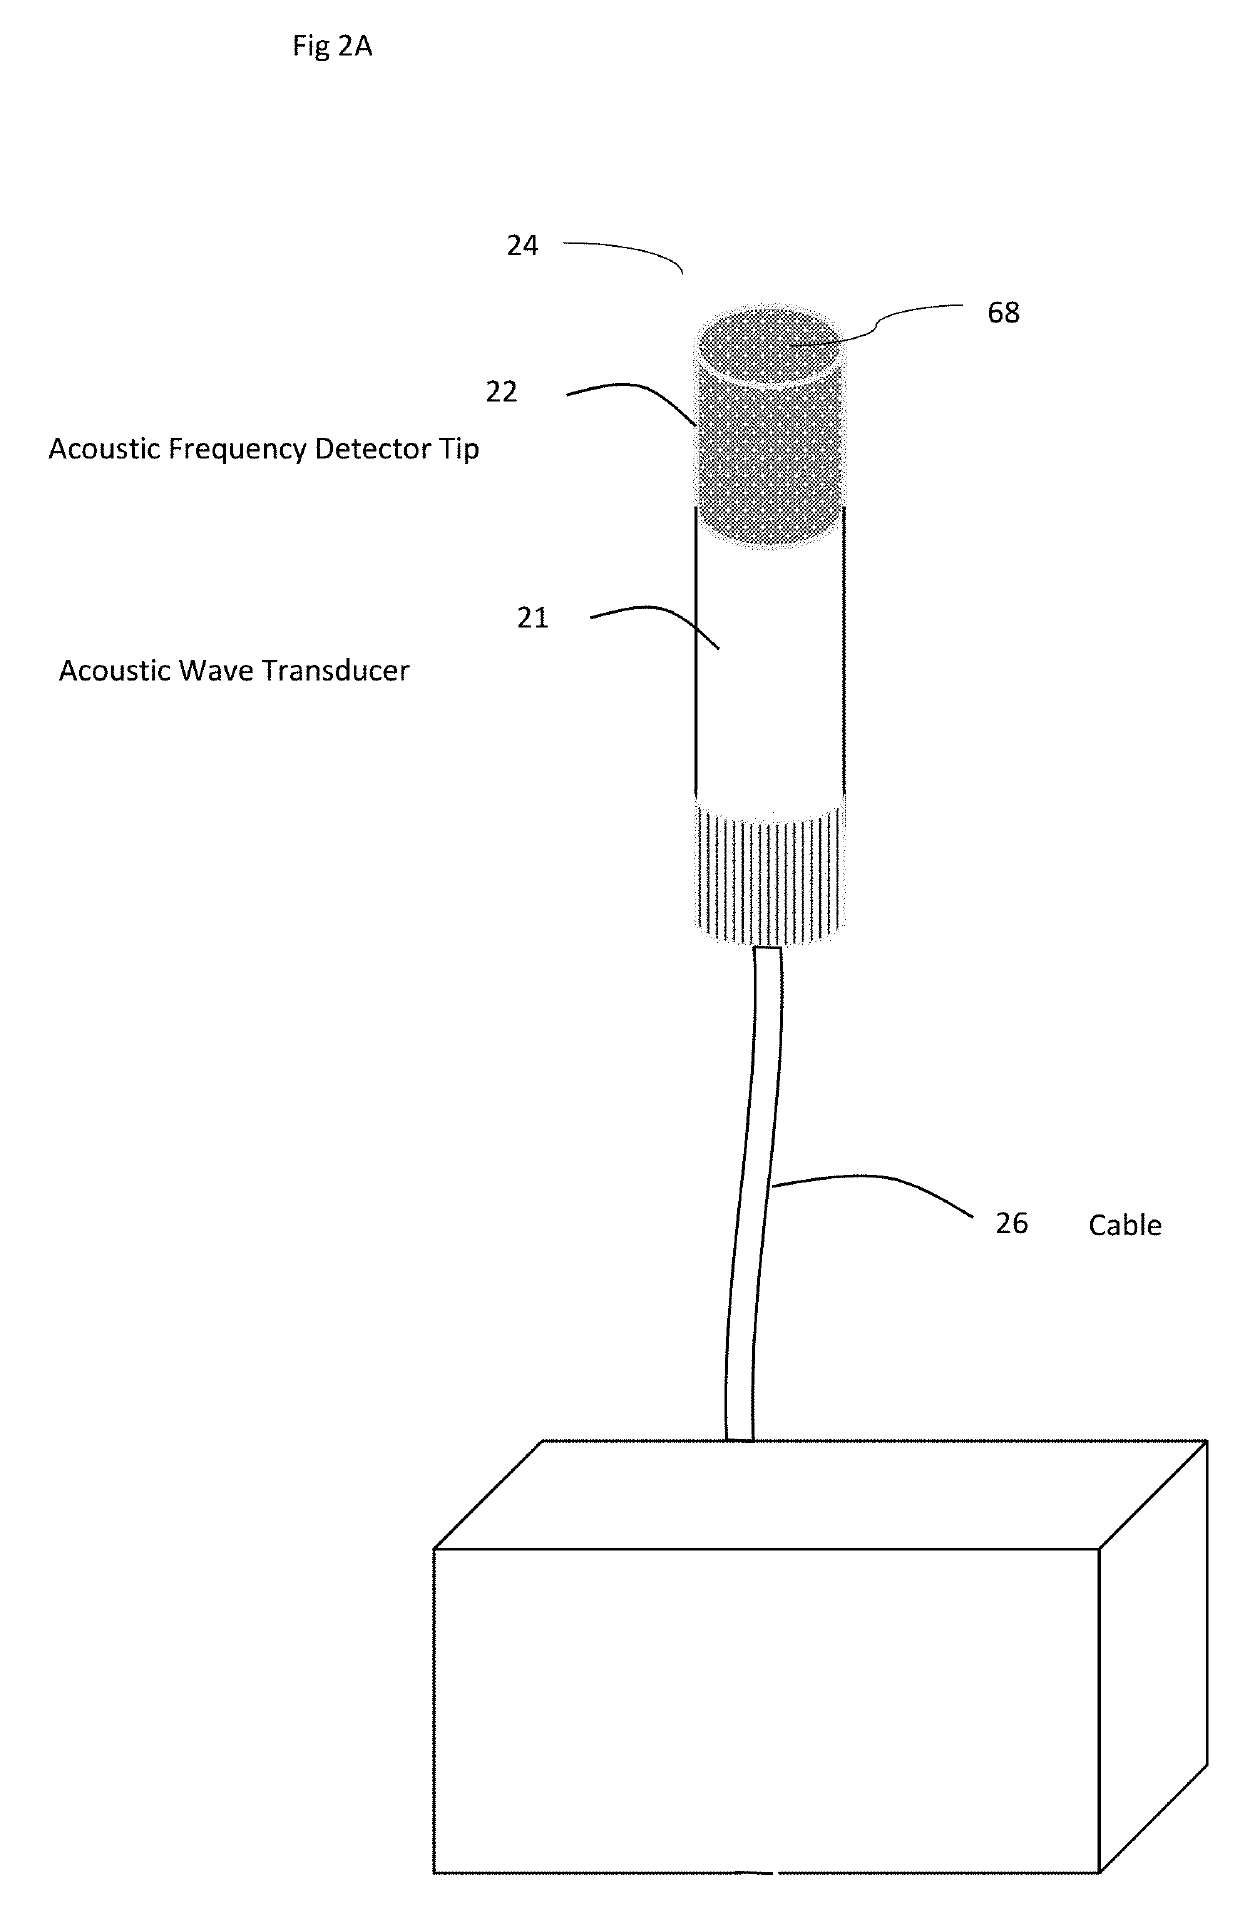 Acoustic Frequency Based System with Crystalline Transducer Module for Non-invasive Detection of Explosives, Contraband, and other Elements